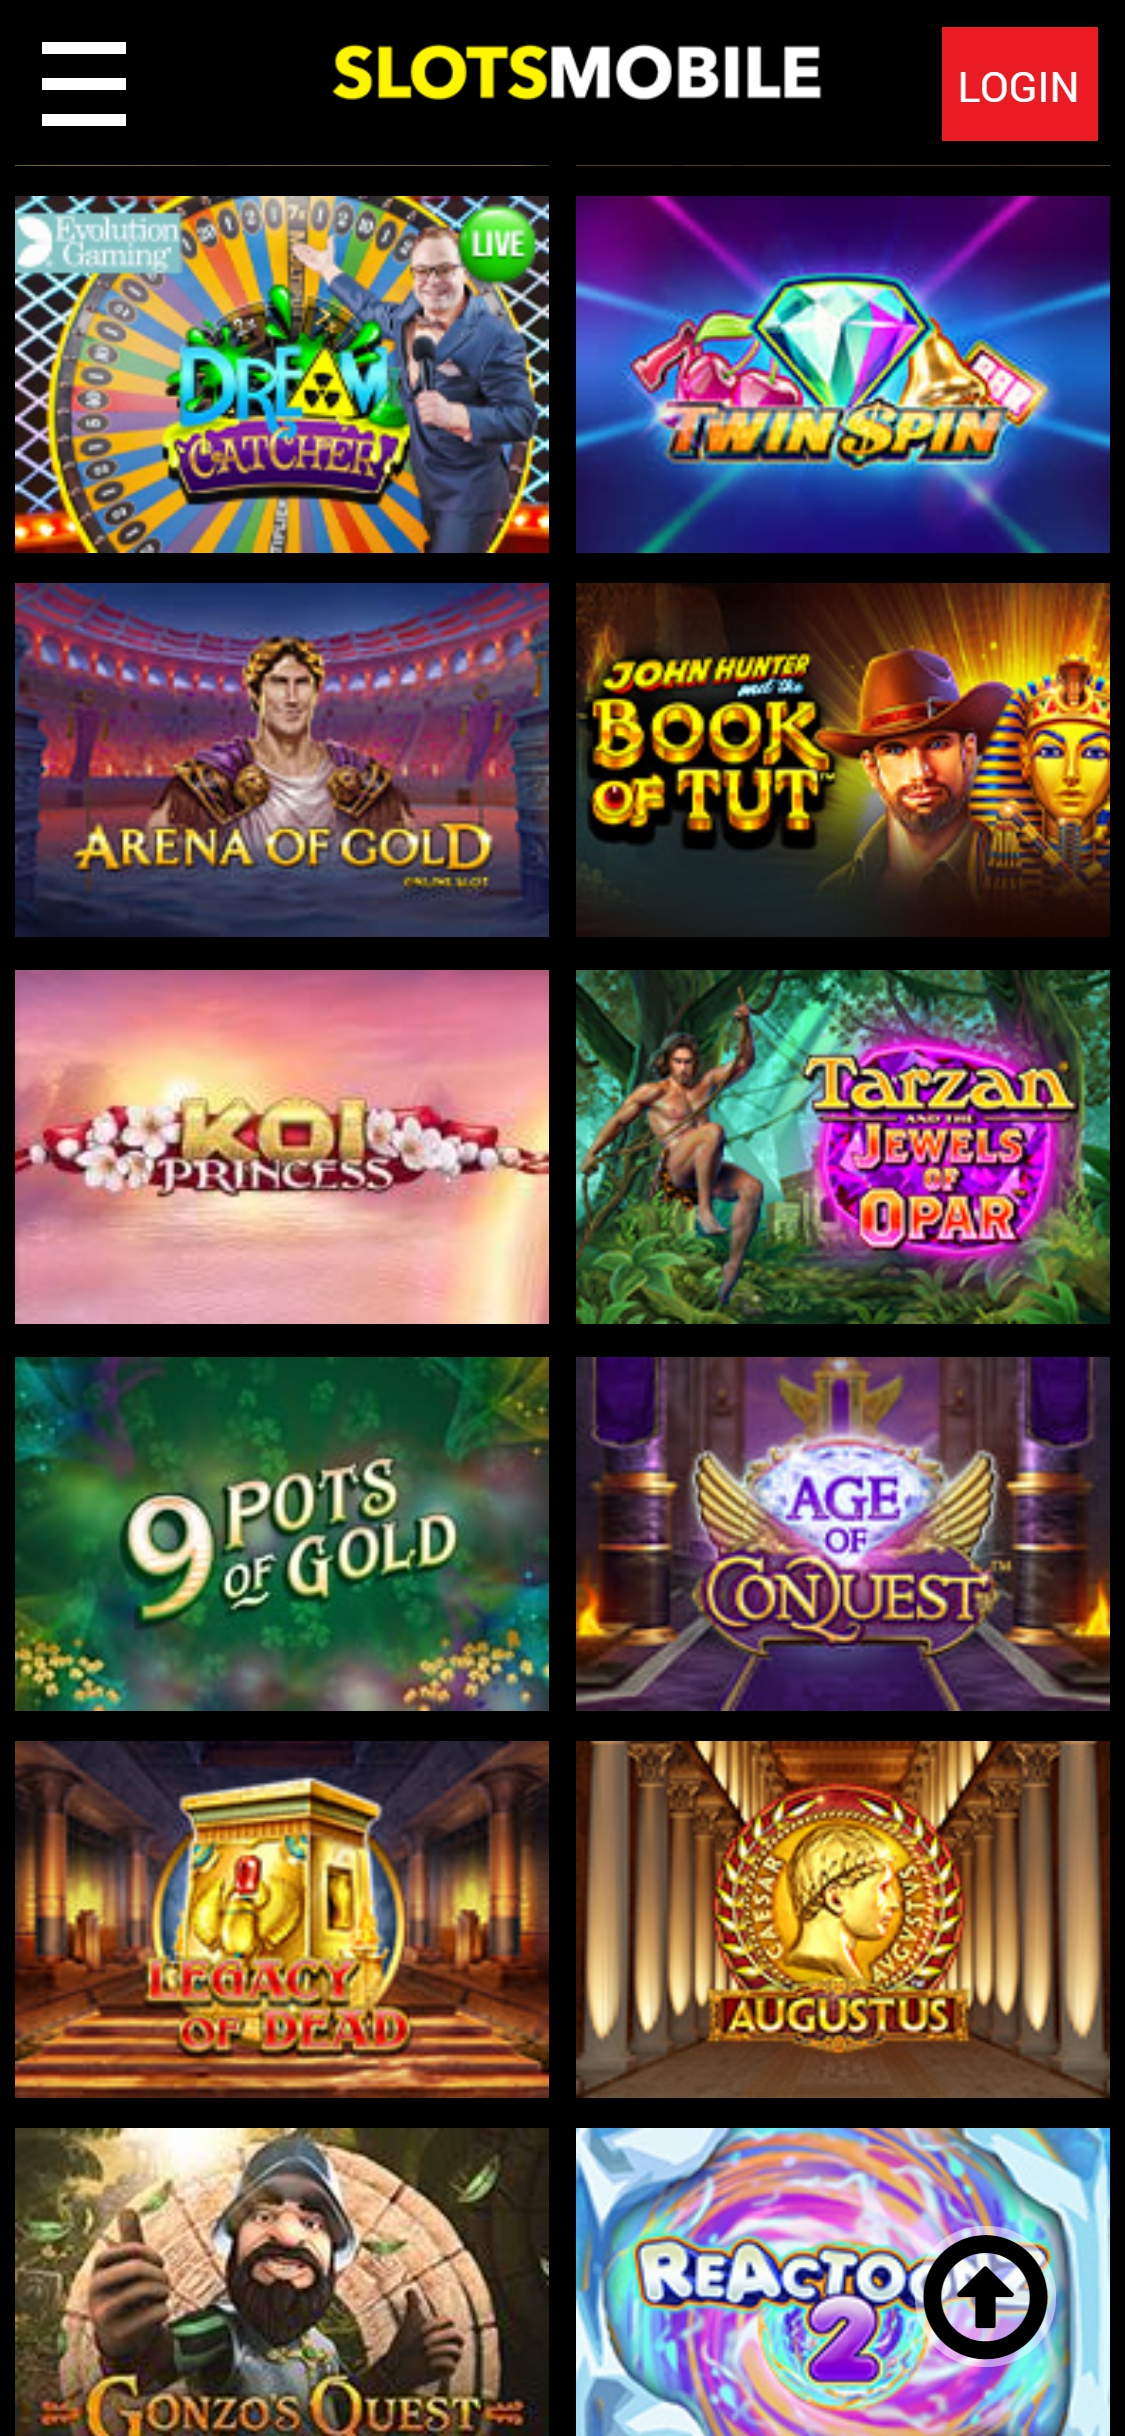 Slots Mobile Casino Mobile Games Review